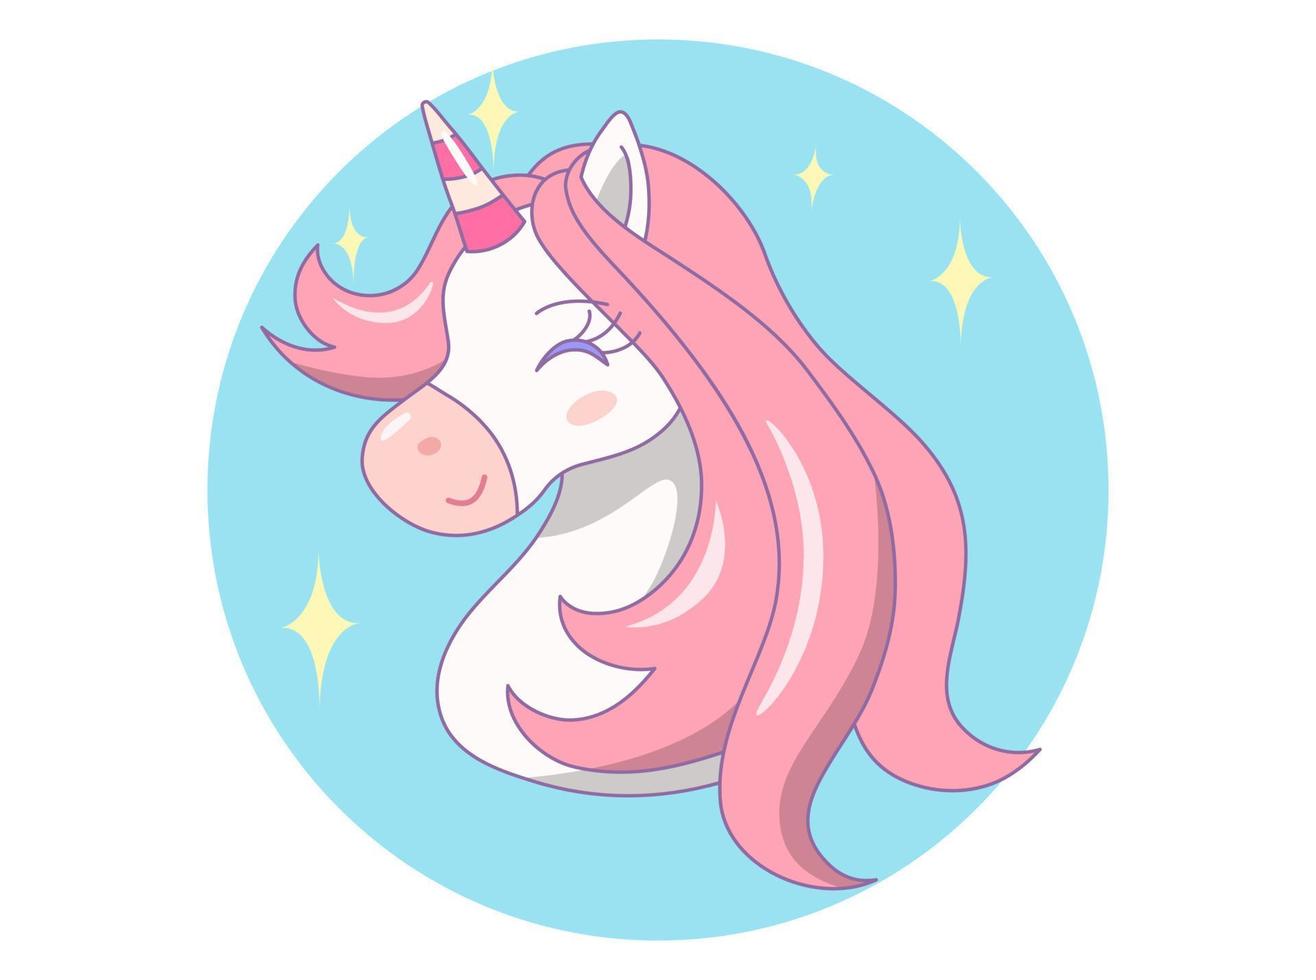 Head of cute unicorn with closed eyes on blue circle with sparkling and white background. Vector design illustration.